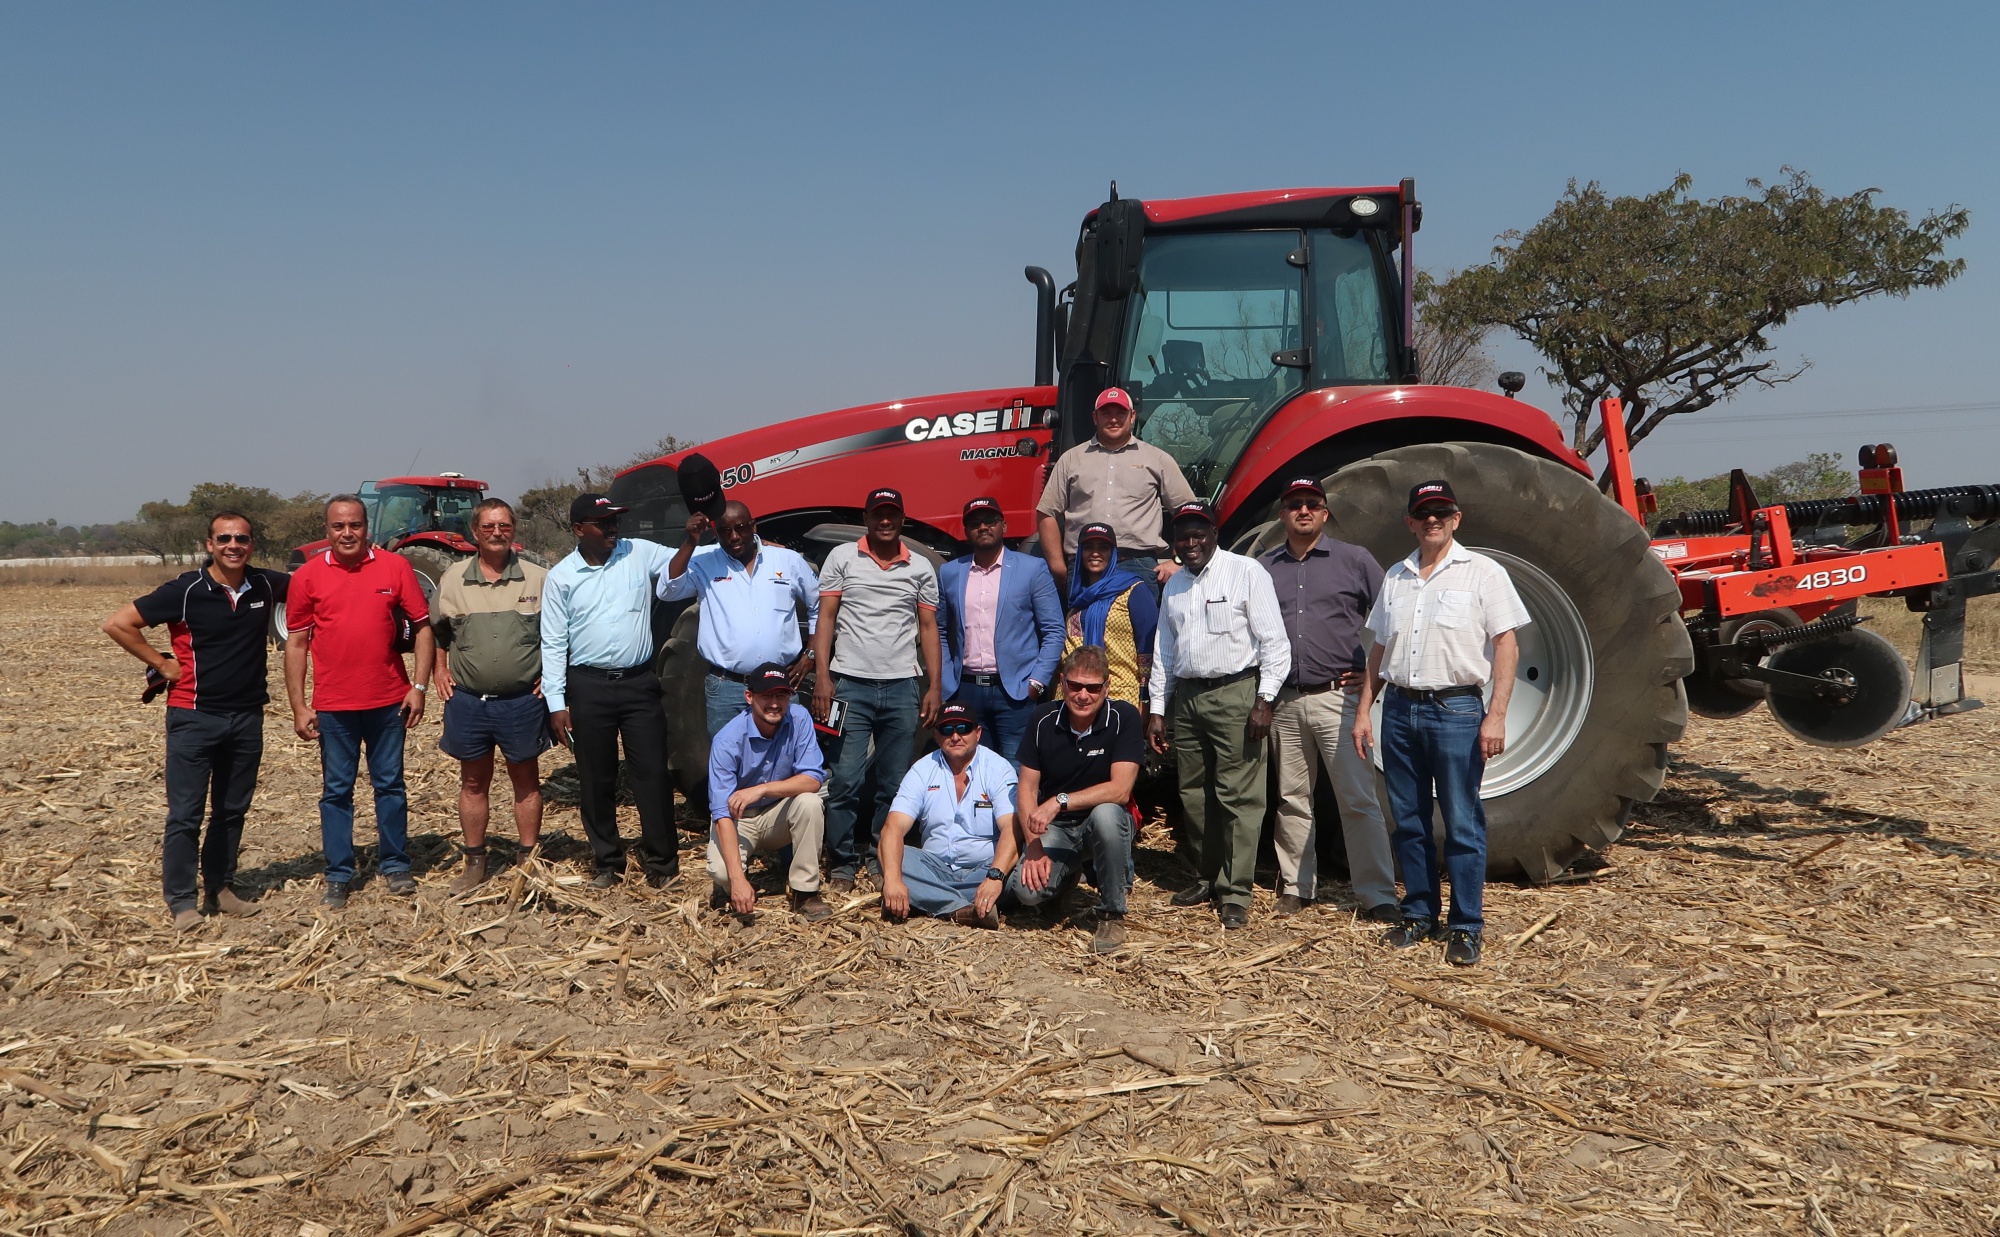 OFFICIAL OPENING OF NEW CASE IH TRAINING ACADEMY TO HELP IMPROVE ZIMBABWEAN AGRICULTURAL PRODUCTIVITY